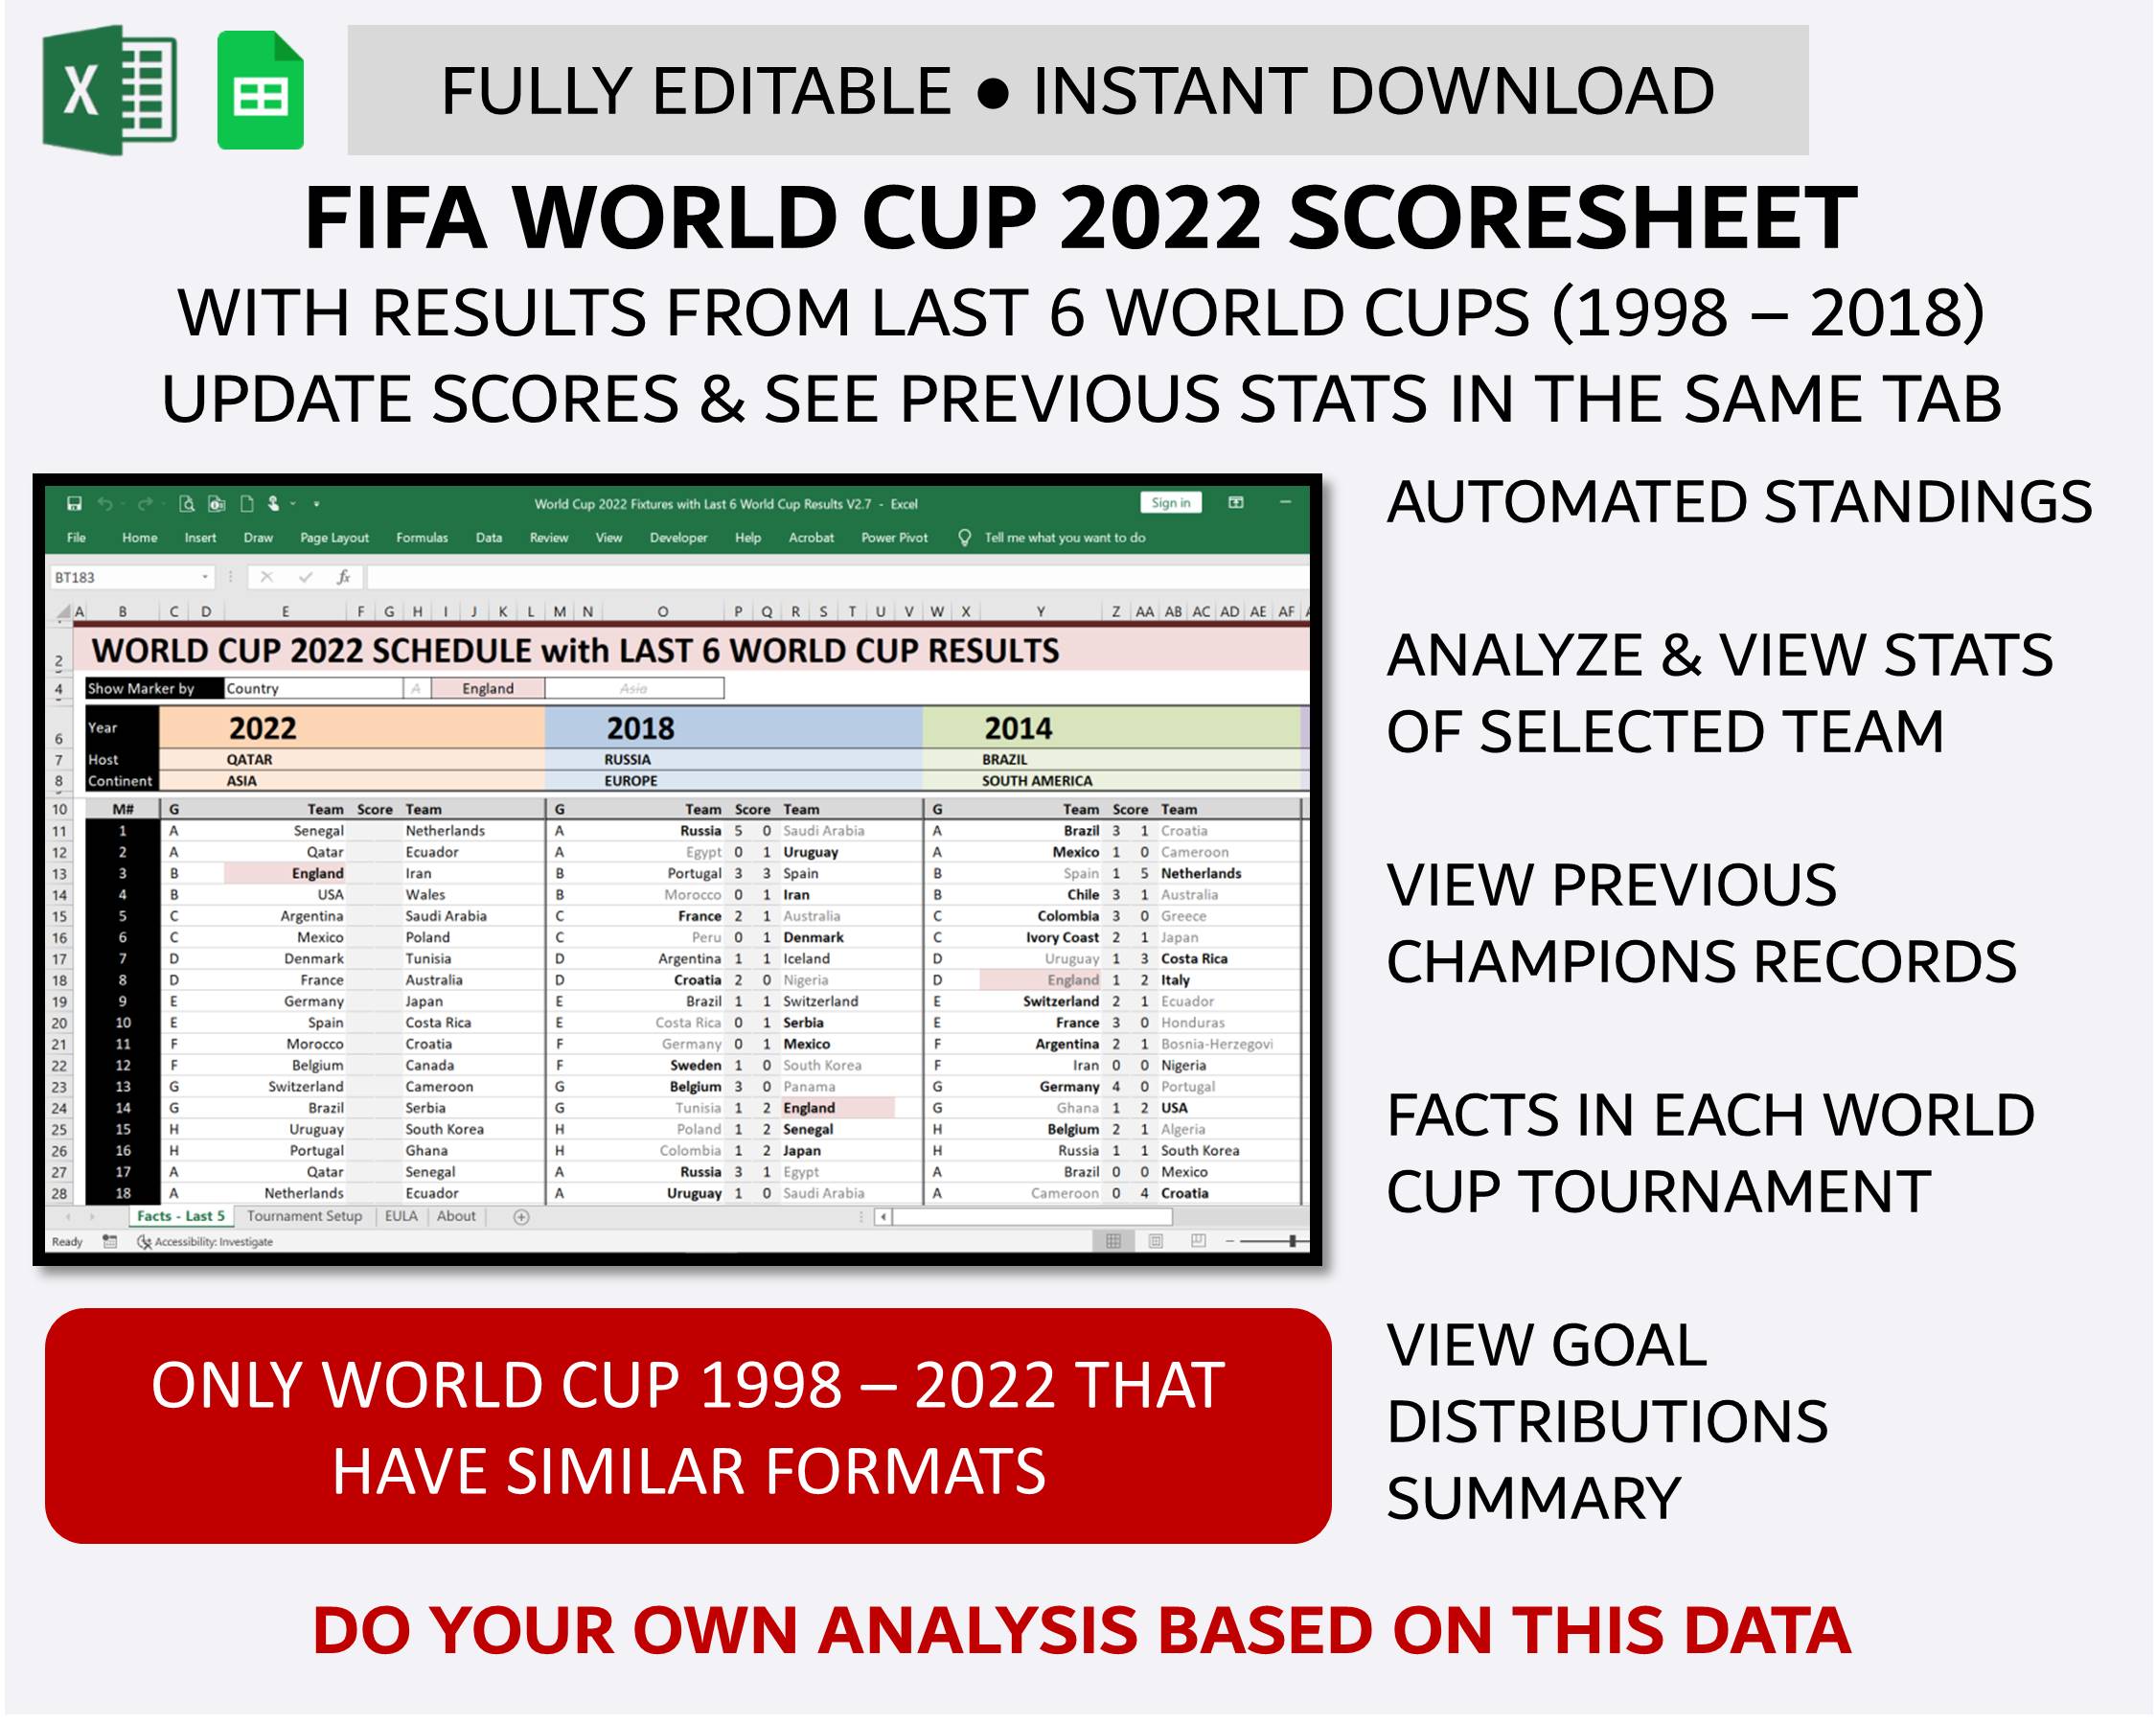 World Cup 1998 - 2022 Stats